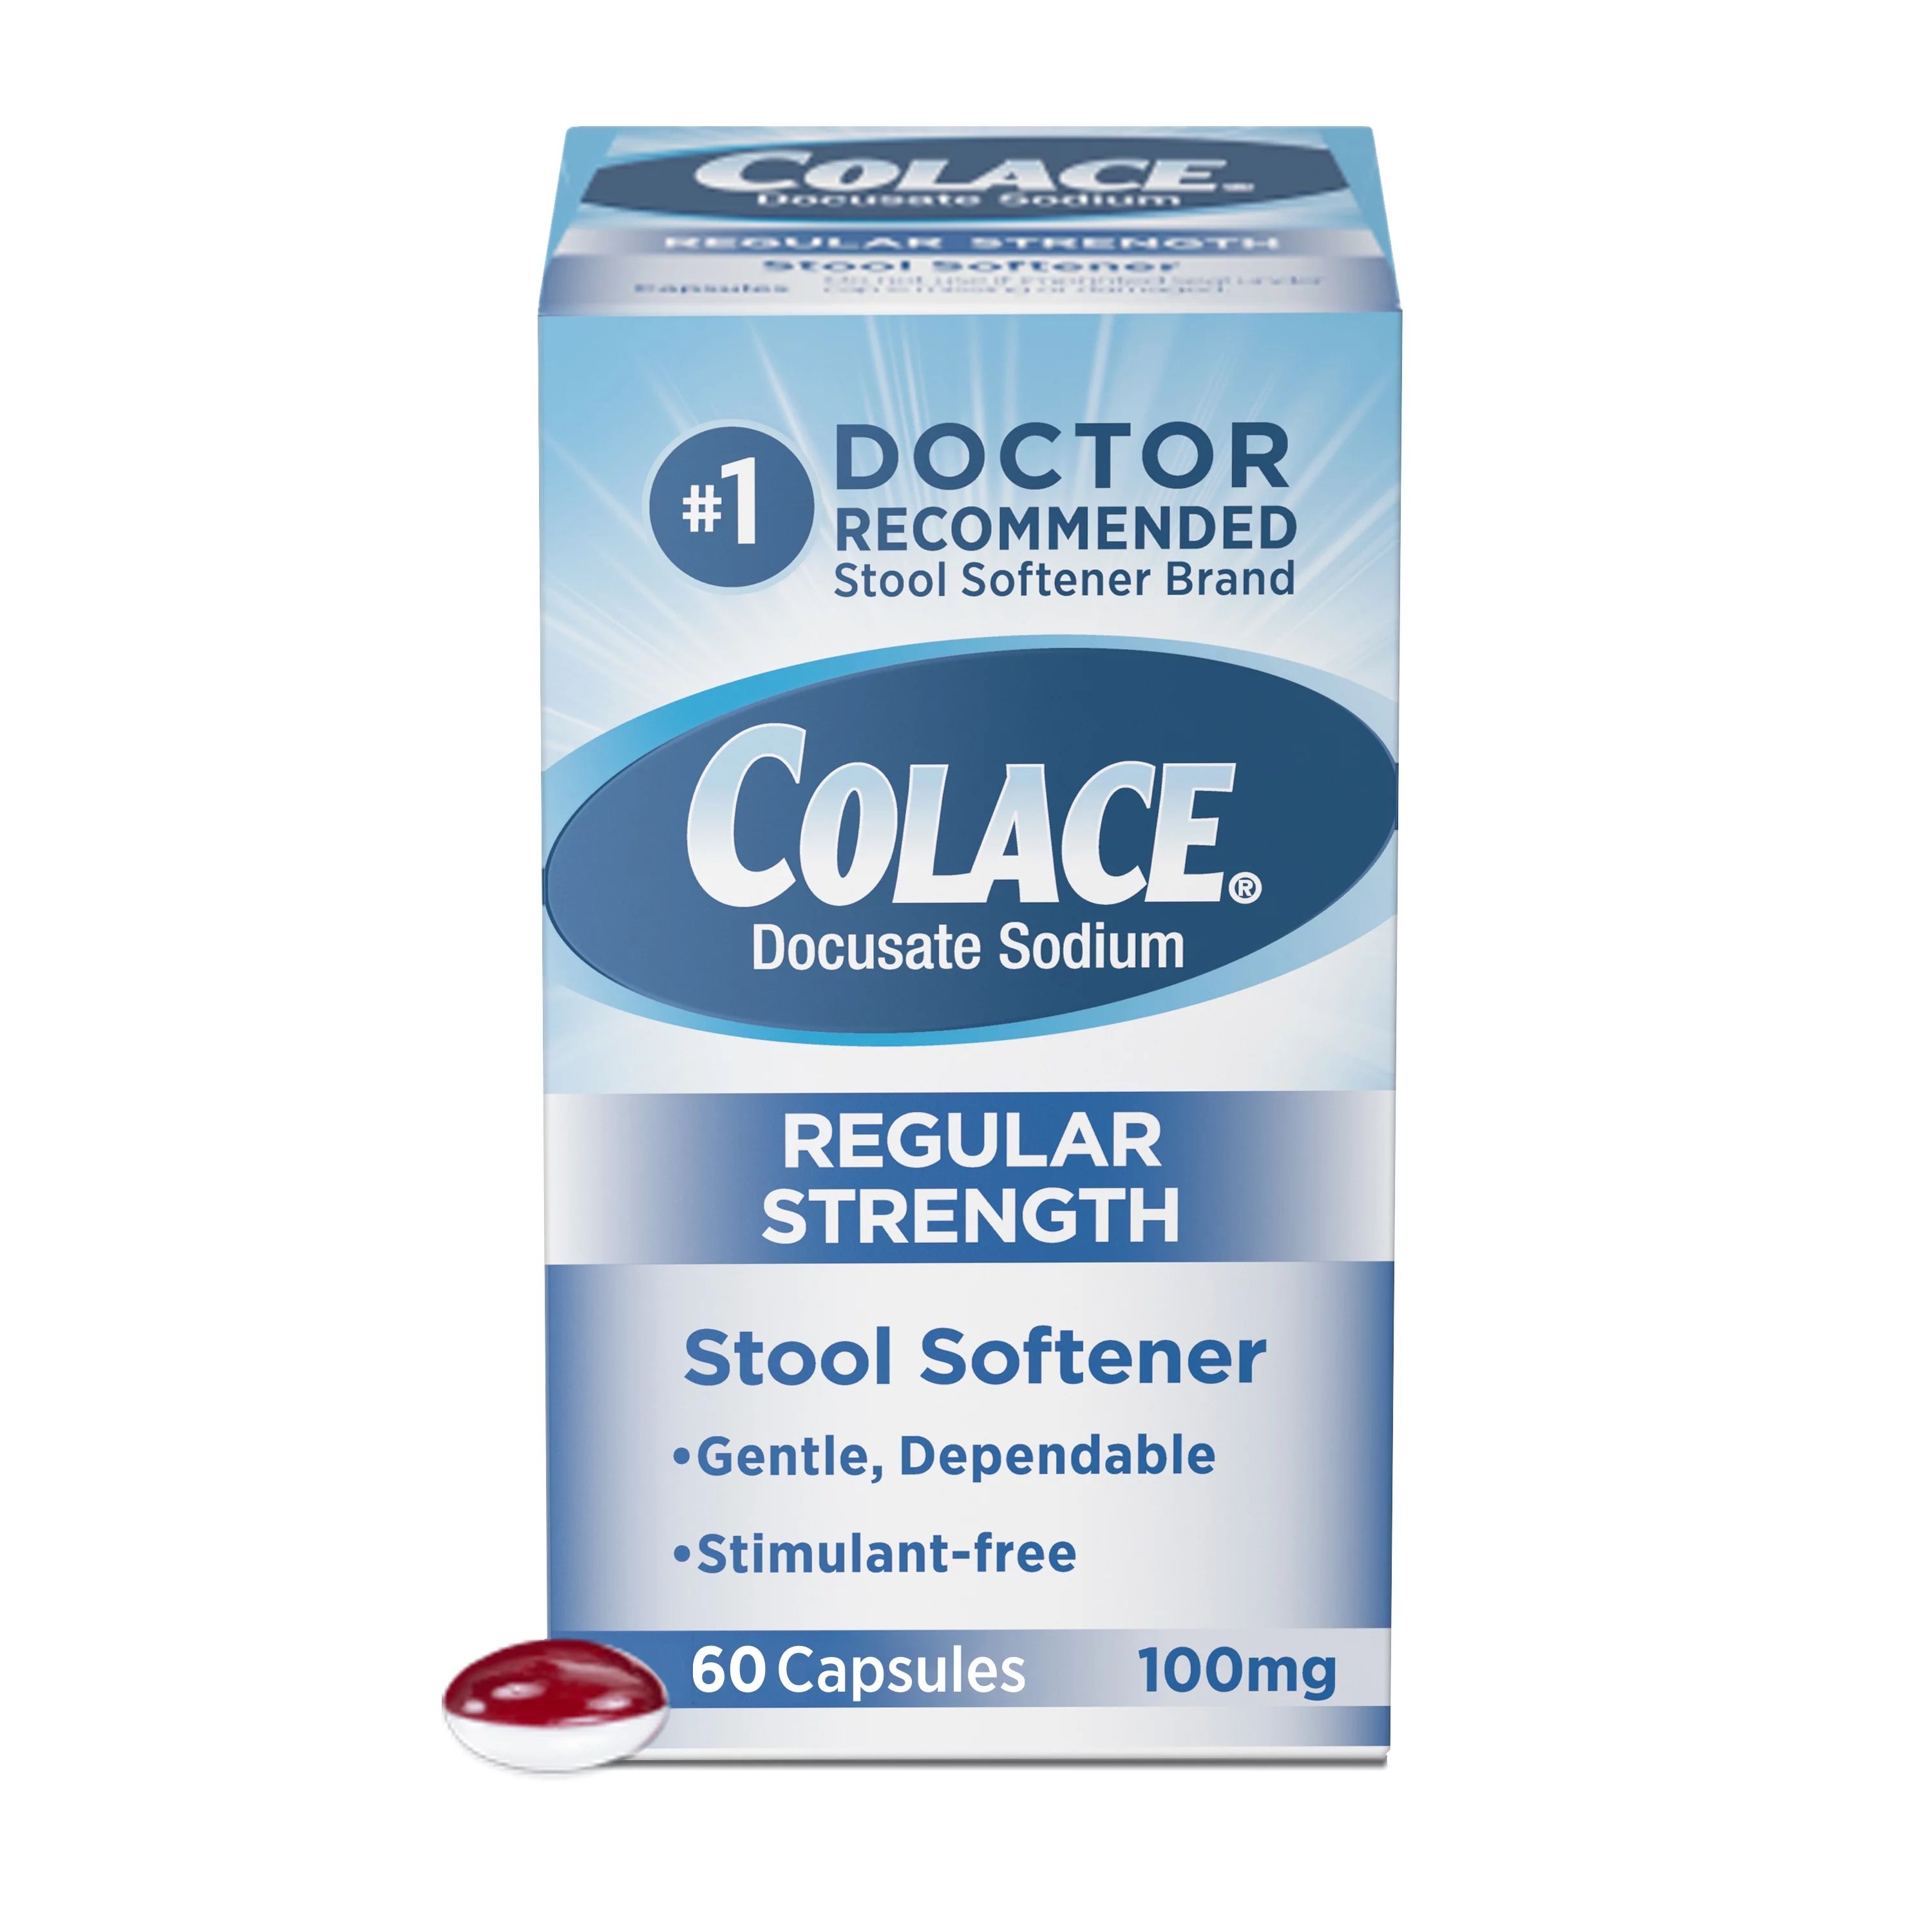 Colace® Regular Strength Stool Softener for Constipation Relief, 100mg Capsules, 60 ct | Walmart (US)